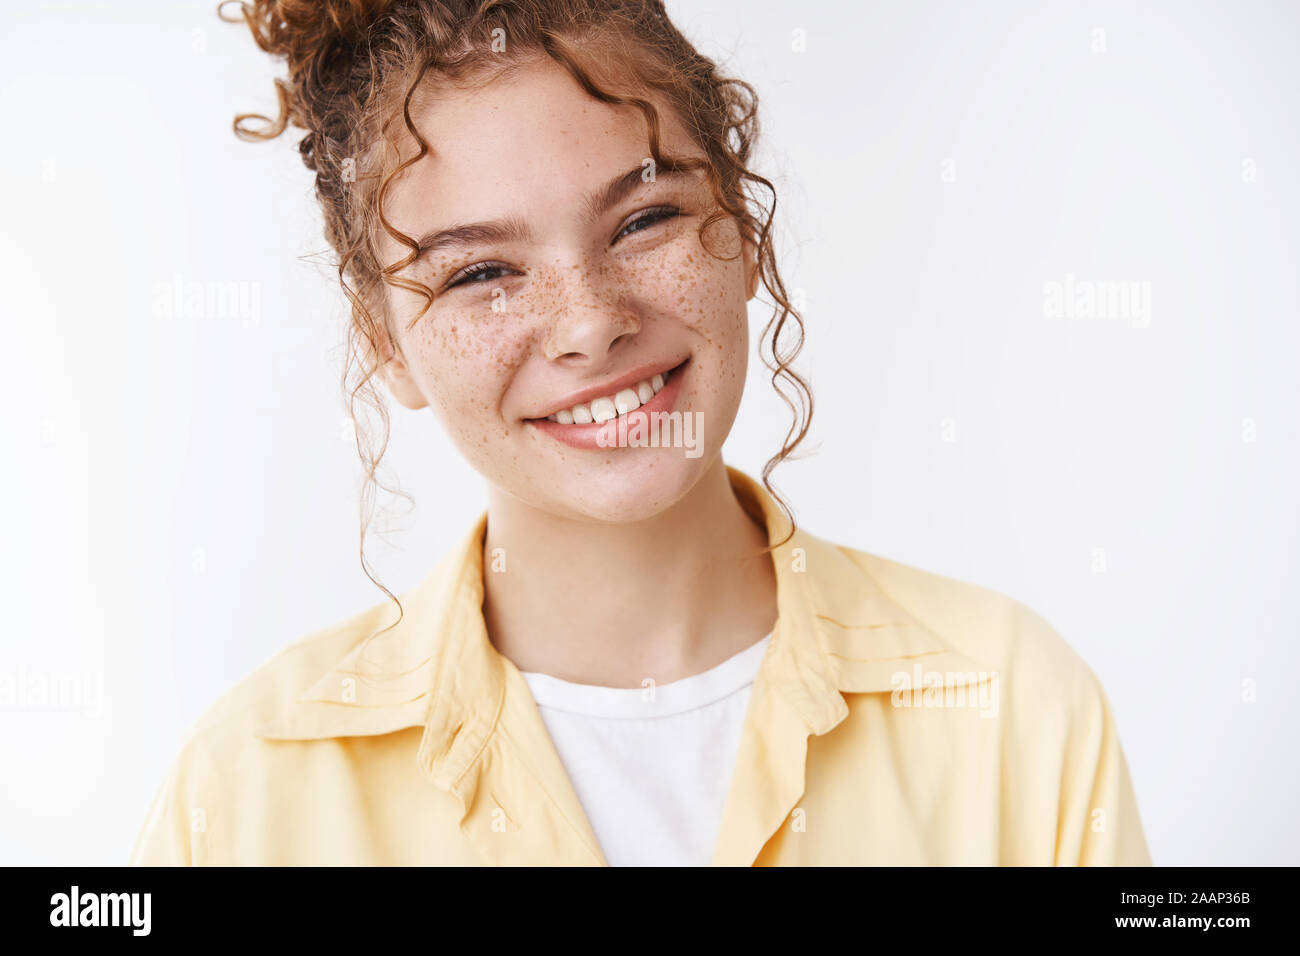 Gorgeous caucasian ginger girl freckles messy curly bun tilting head friendly pleasantly smiling expressing optimism, feel happy relaxed, standing Stock Photo